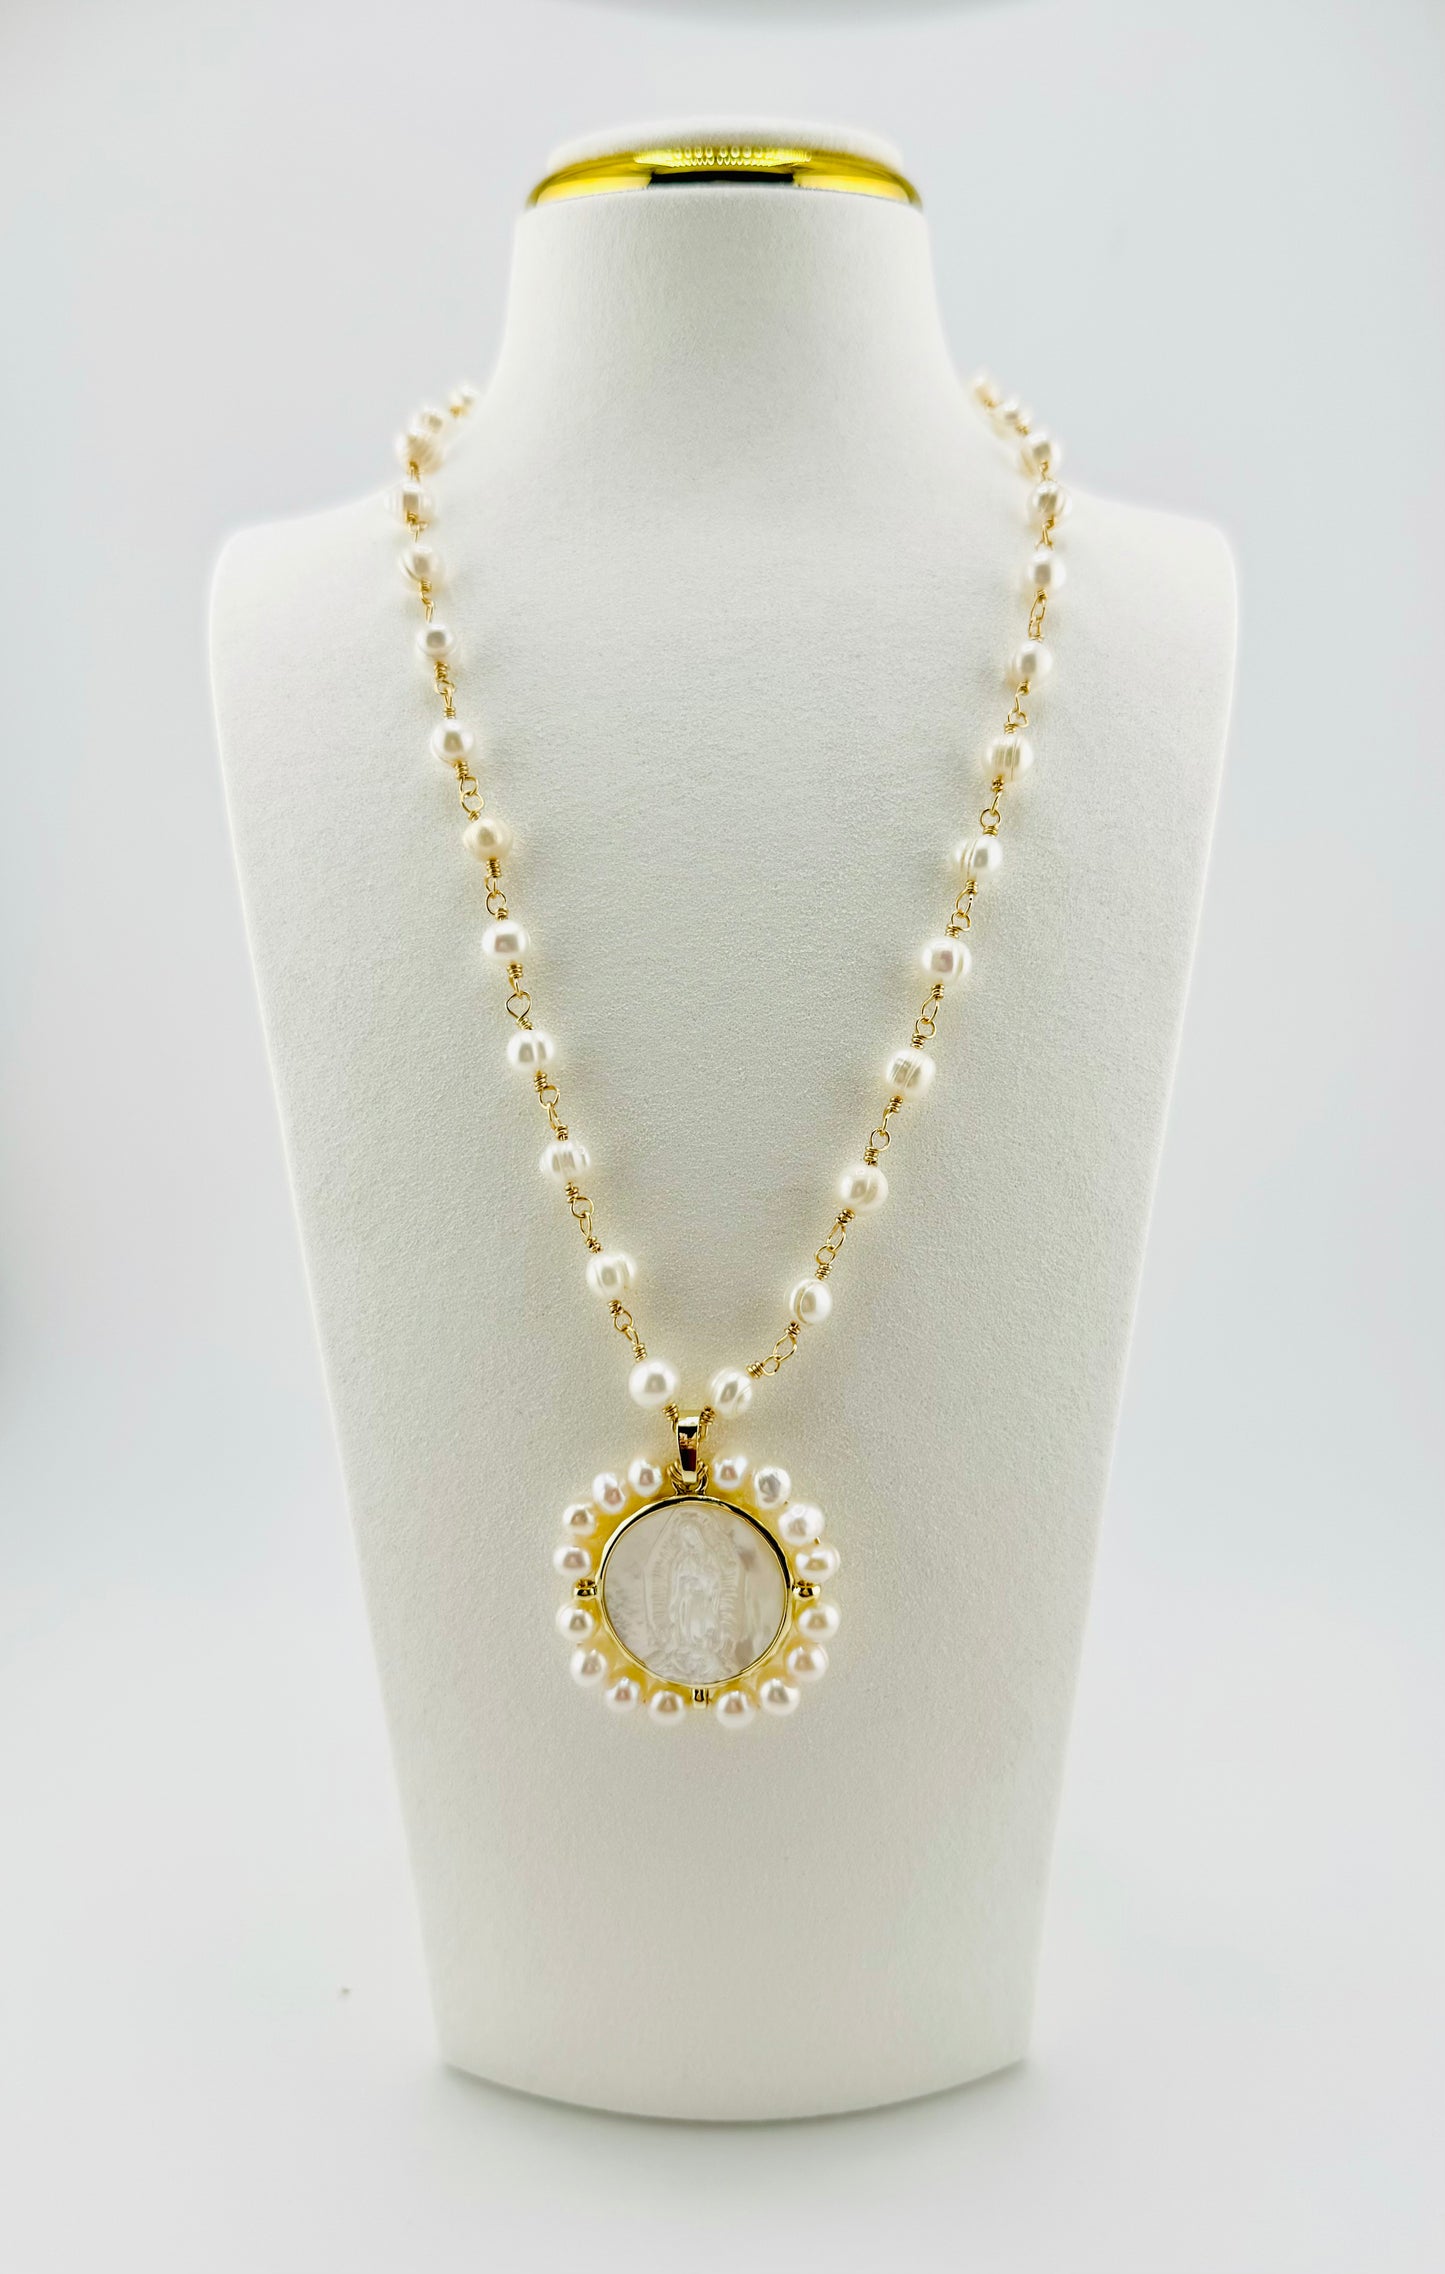 Virgen of Guadalupe fresh water pearls necklace with 18k gold filled